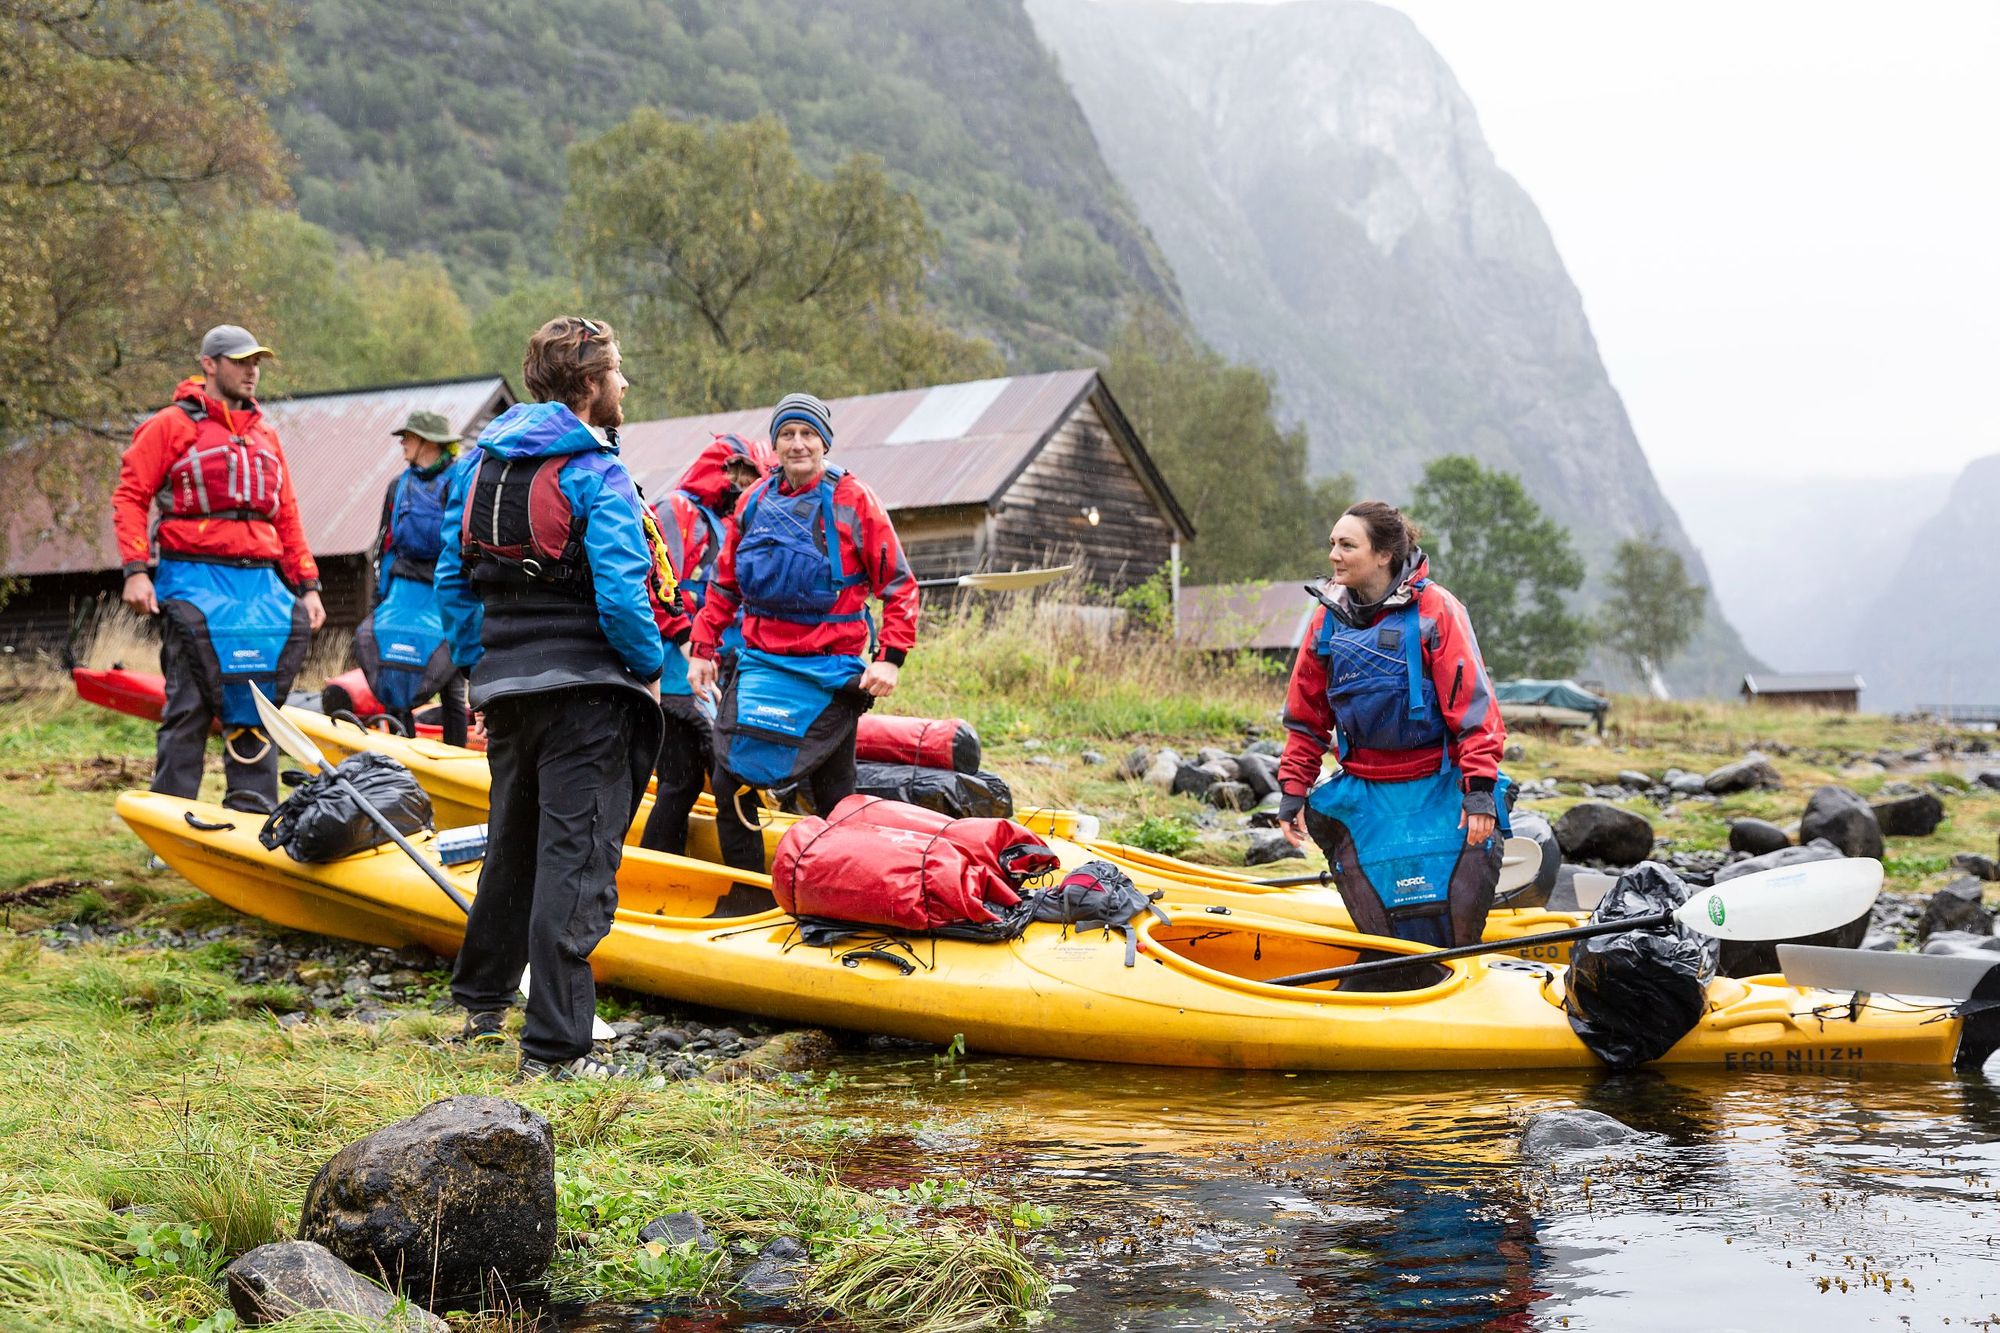 A group of kayakers prepare to set off to kayak through the fjords of Norway